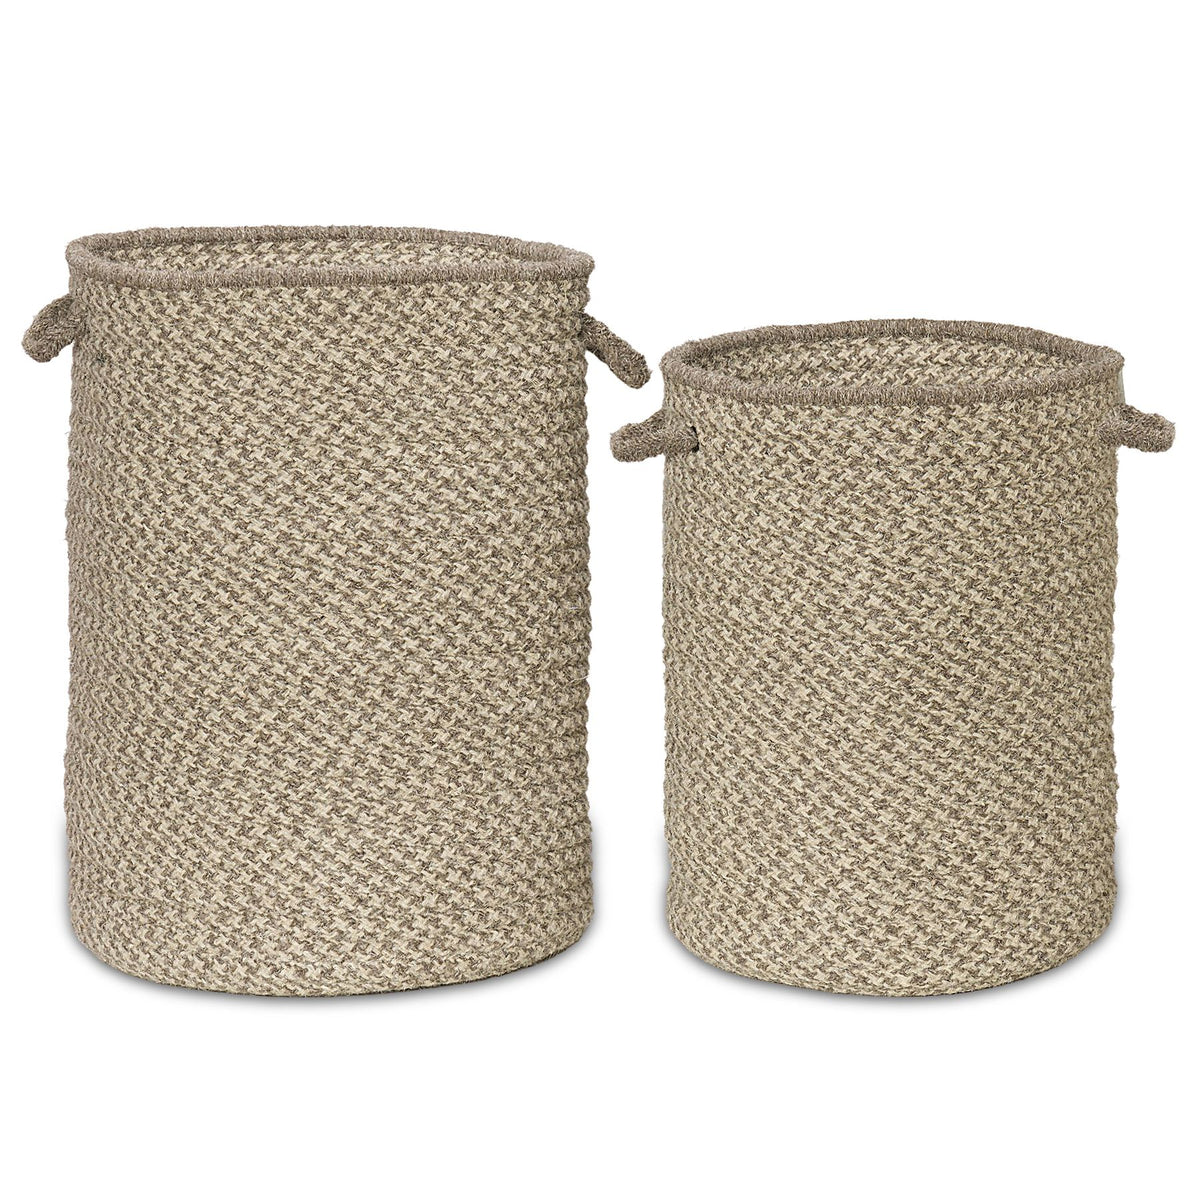 A small and a large dark grey houndstooth American Made wool hampers